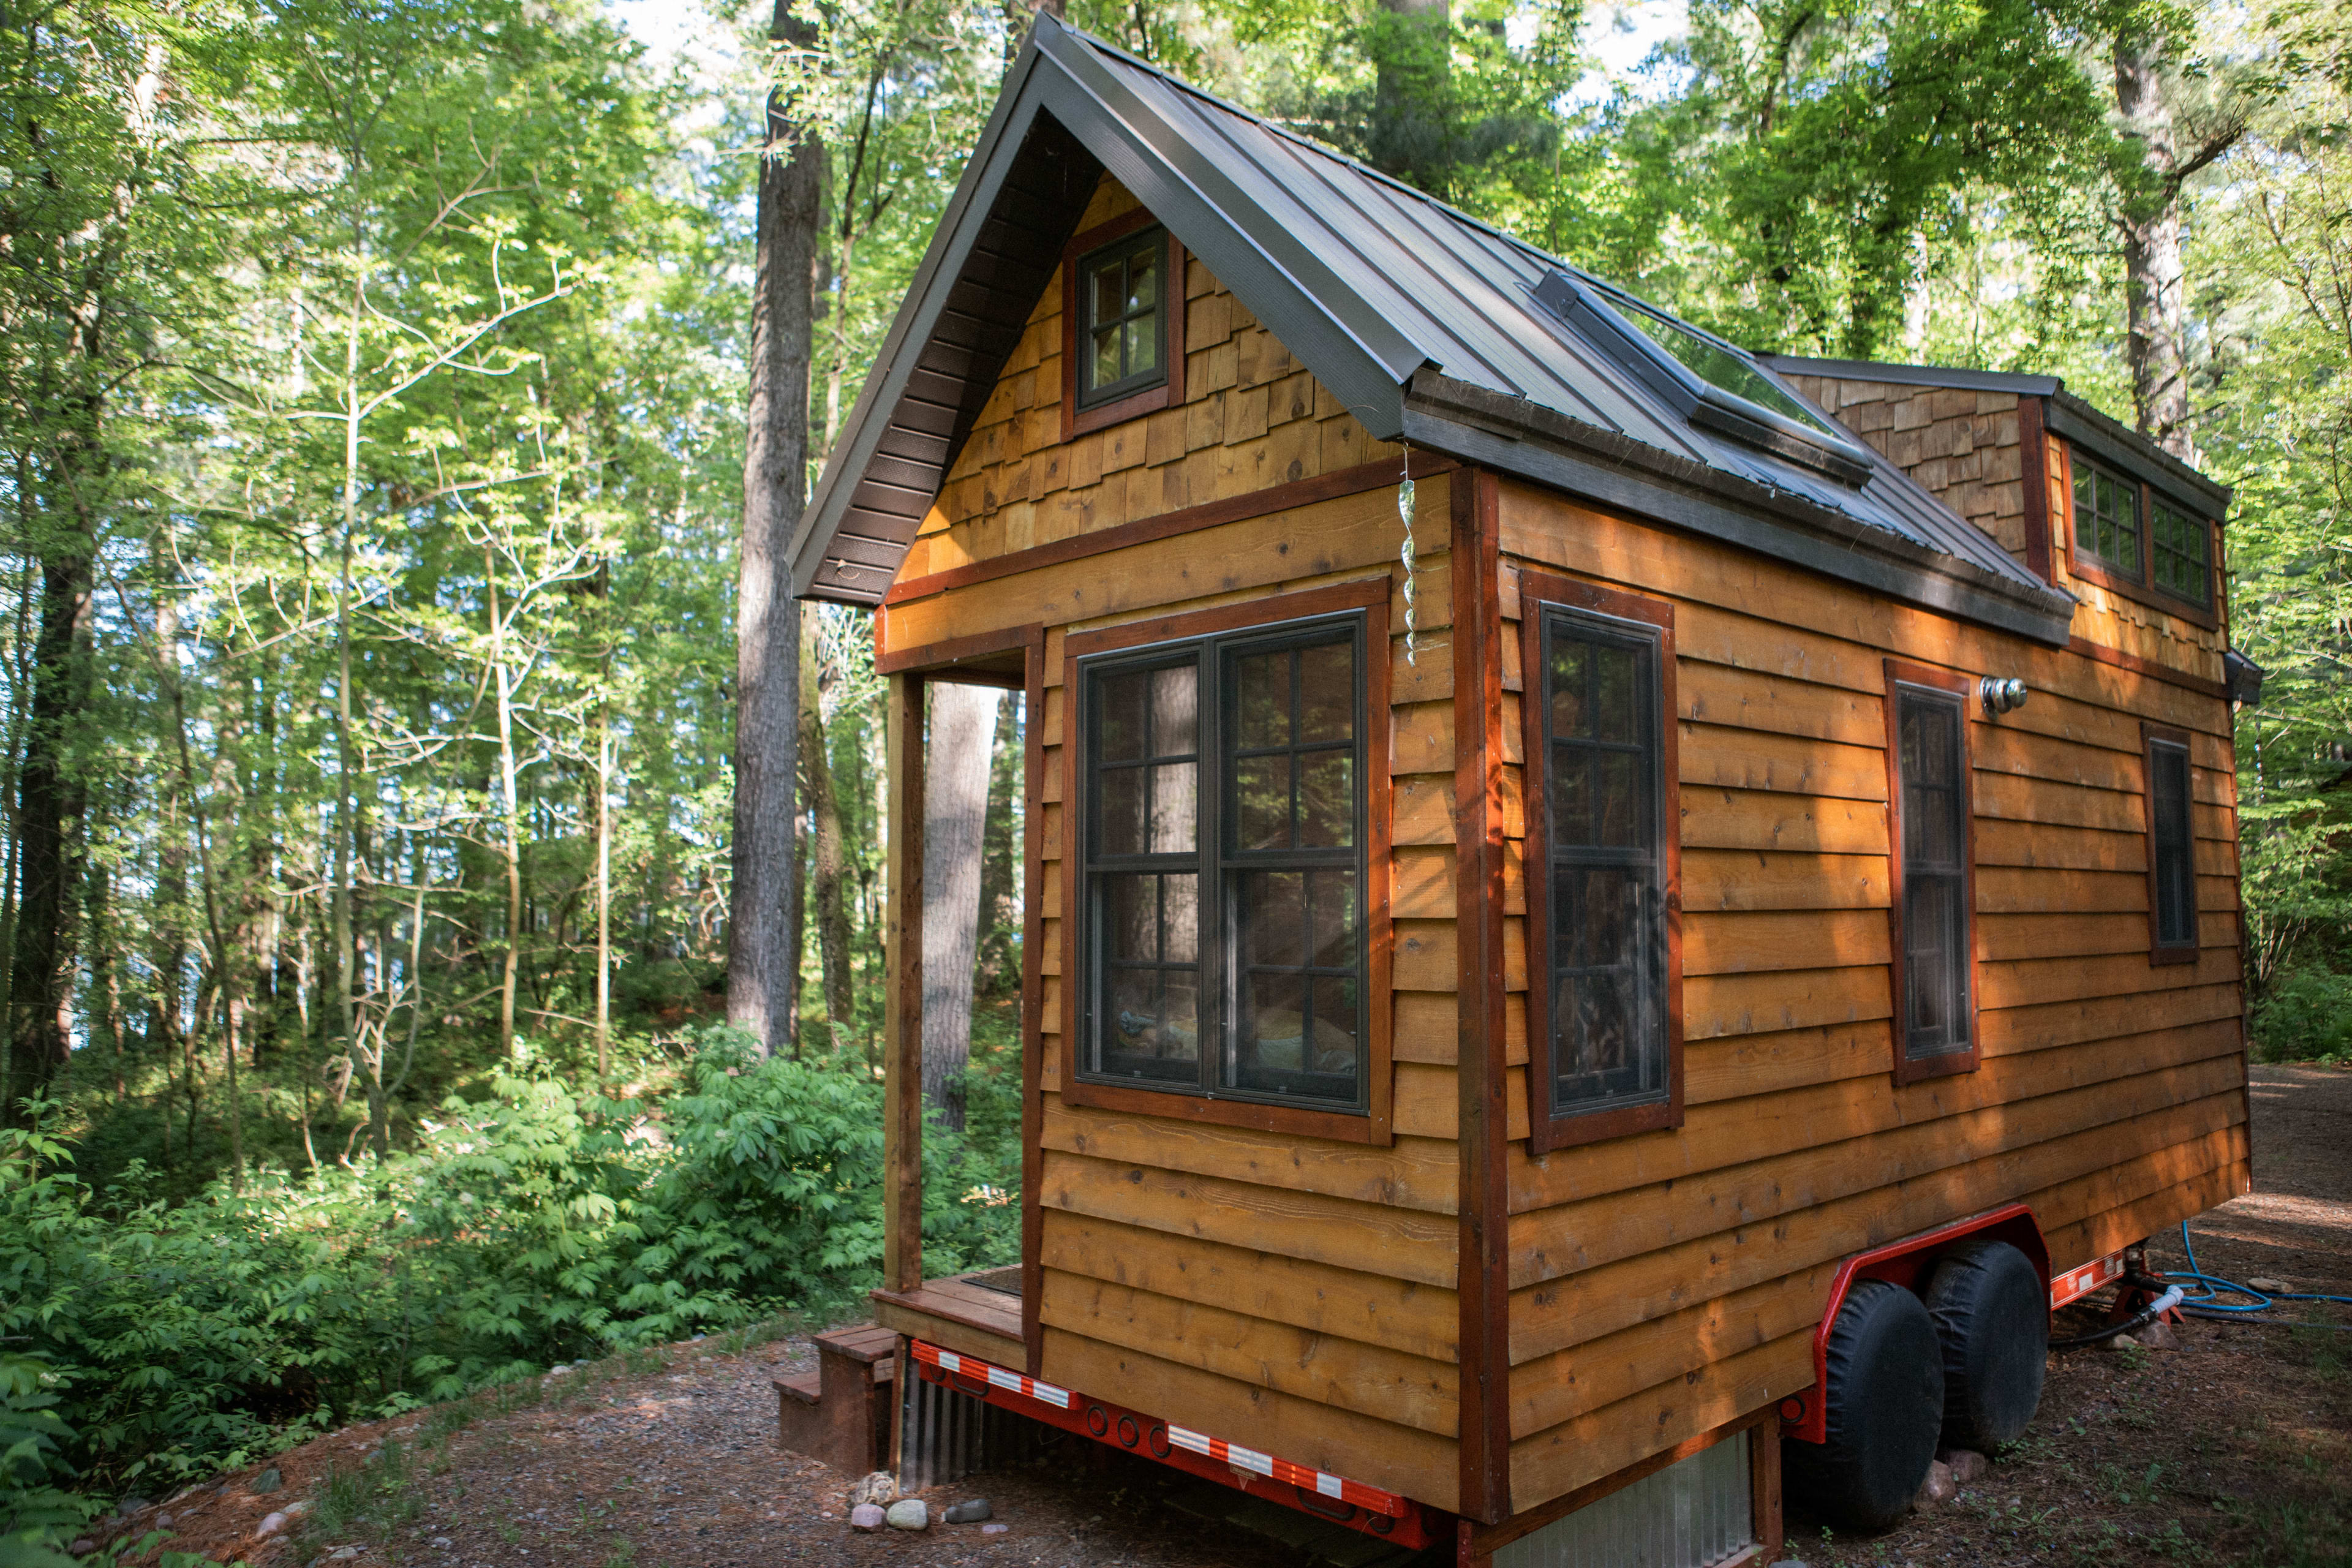 Here are a couple shots of the exterior of the tiny house! So cute!